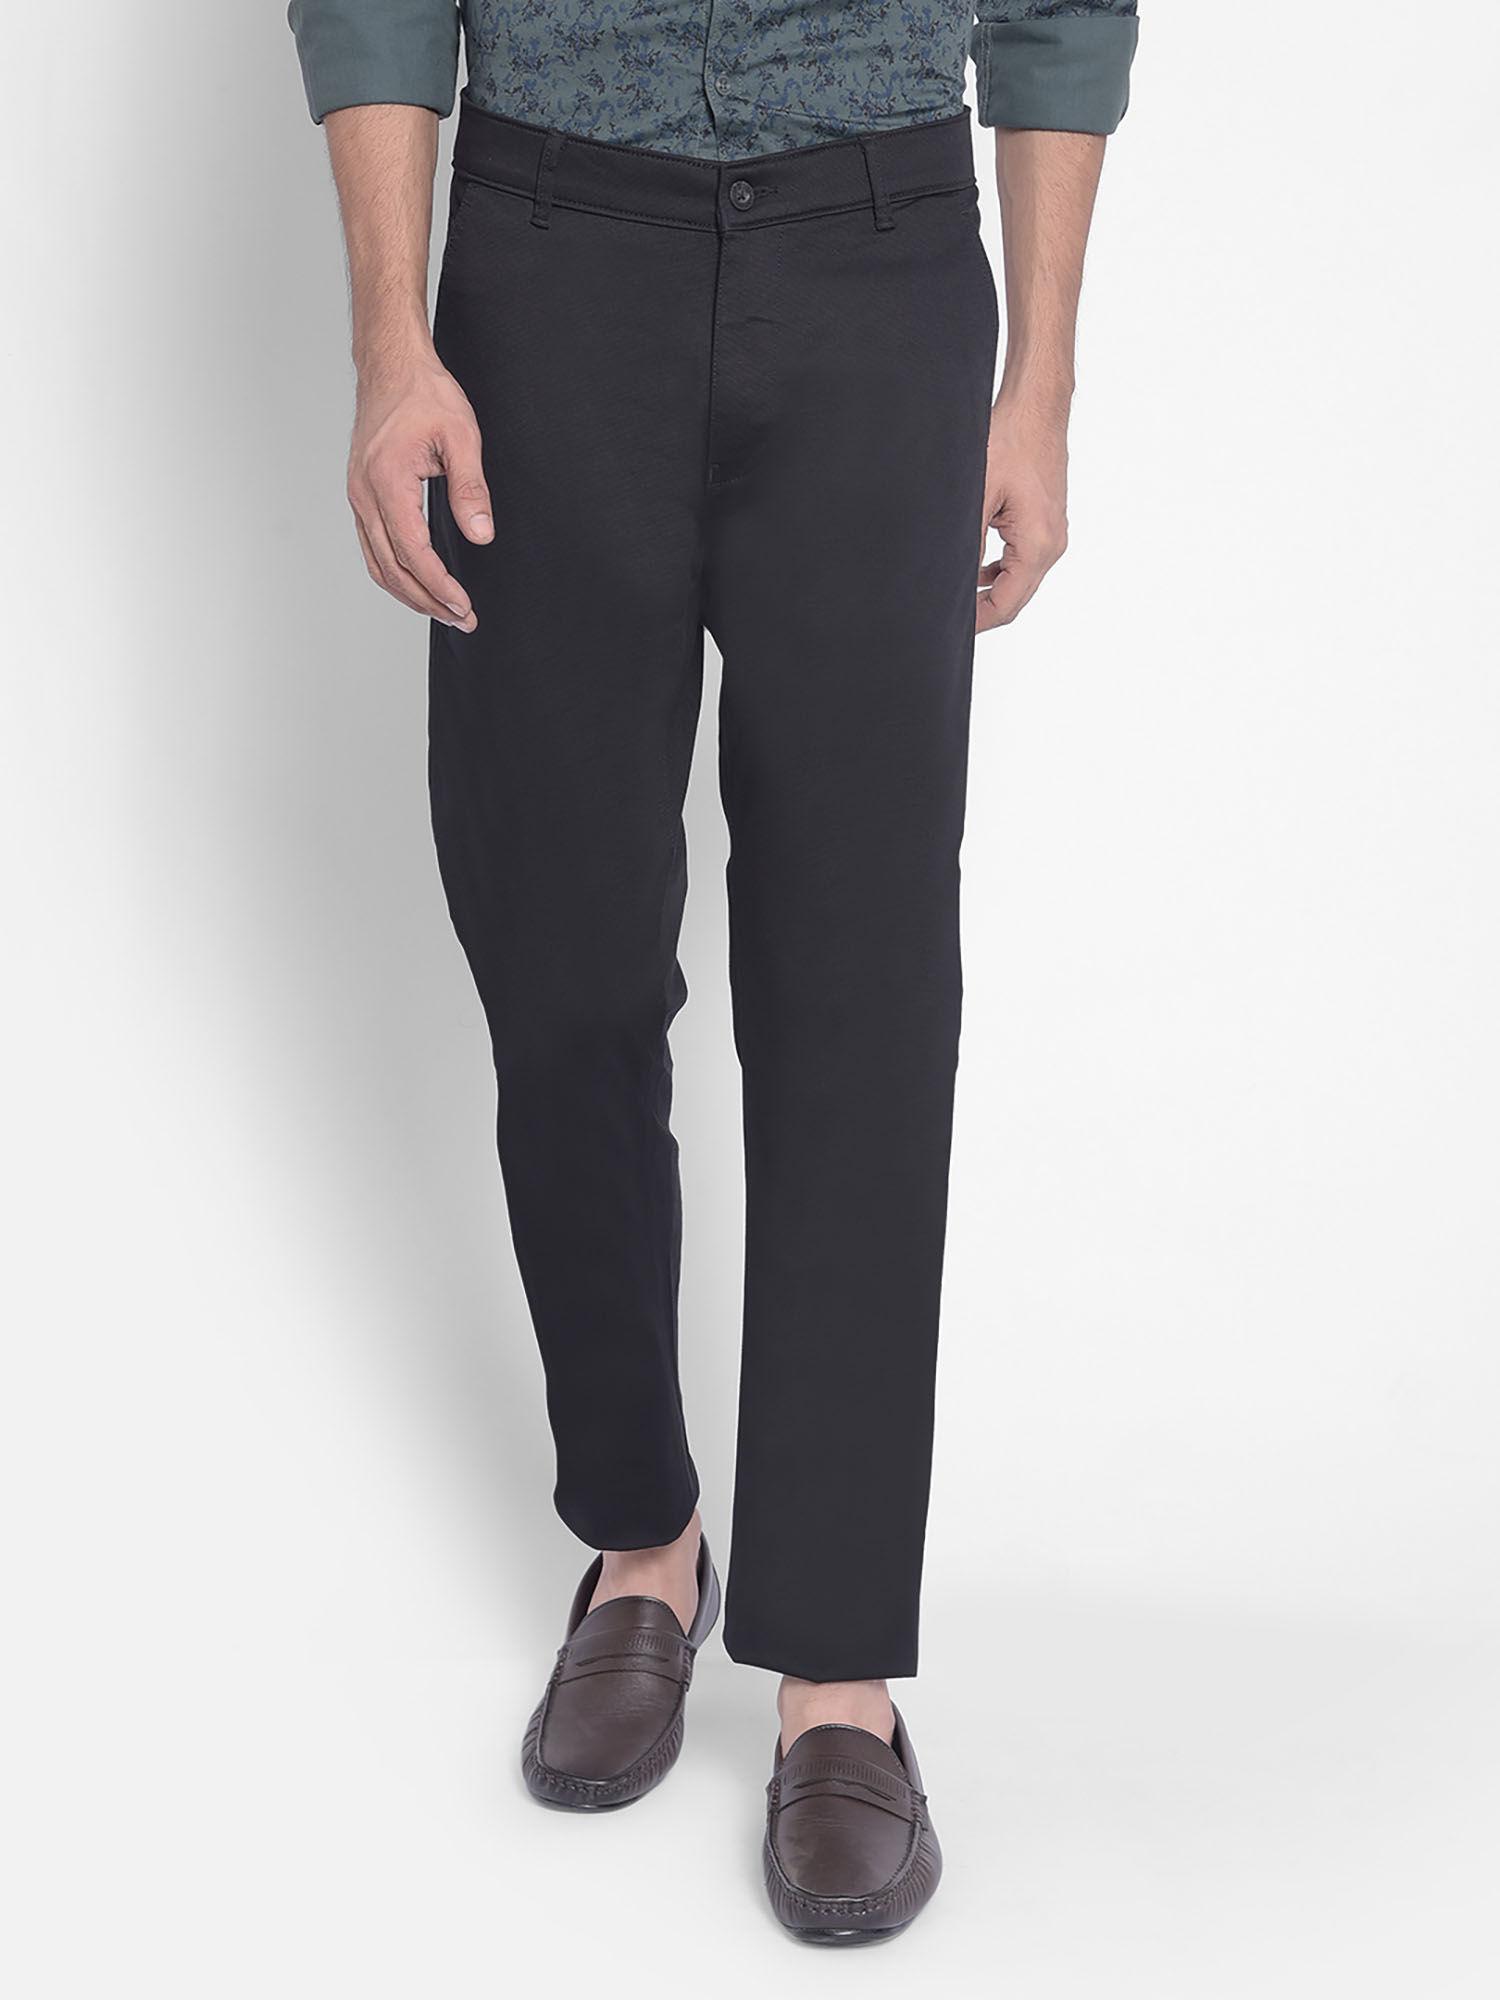 mens black solid trousers